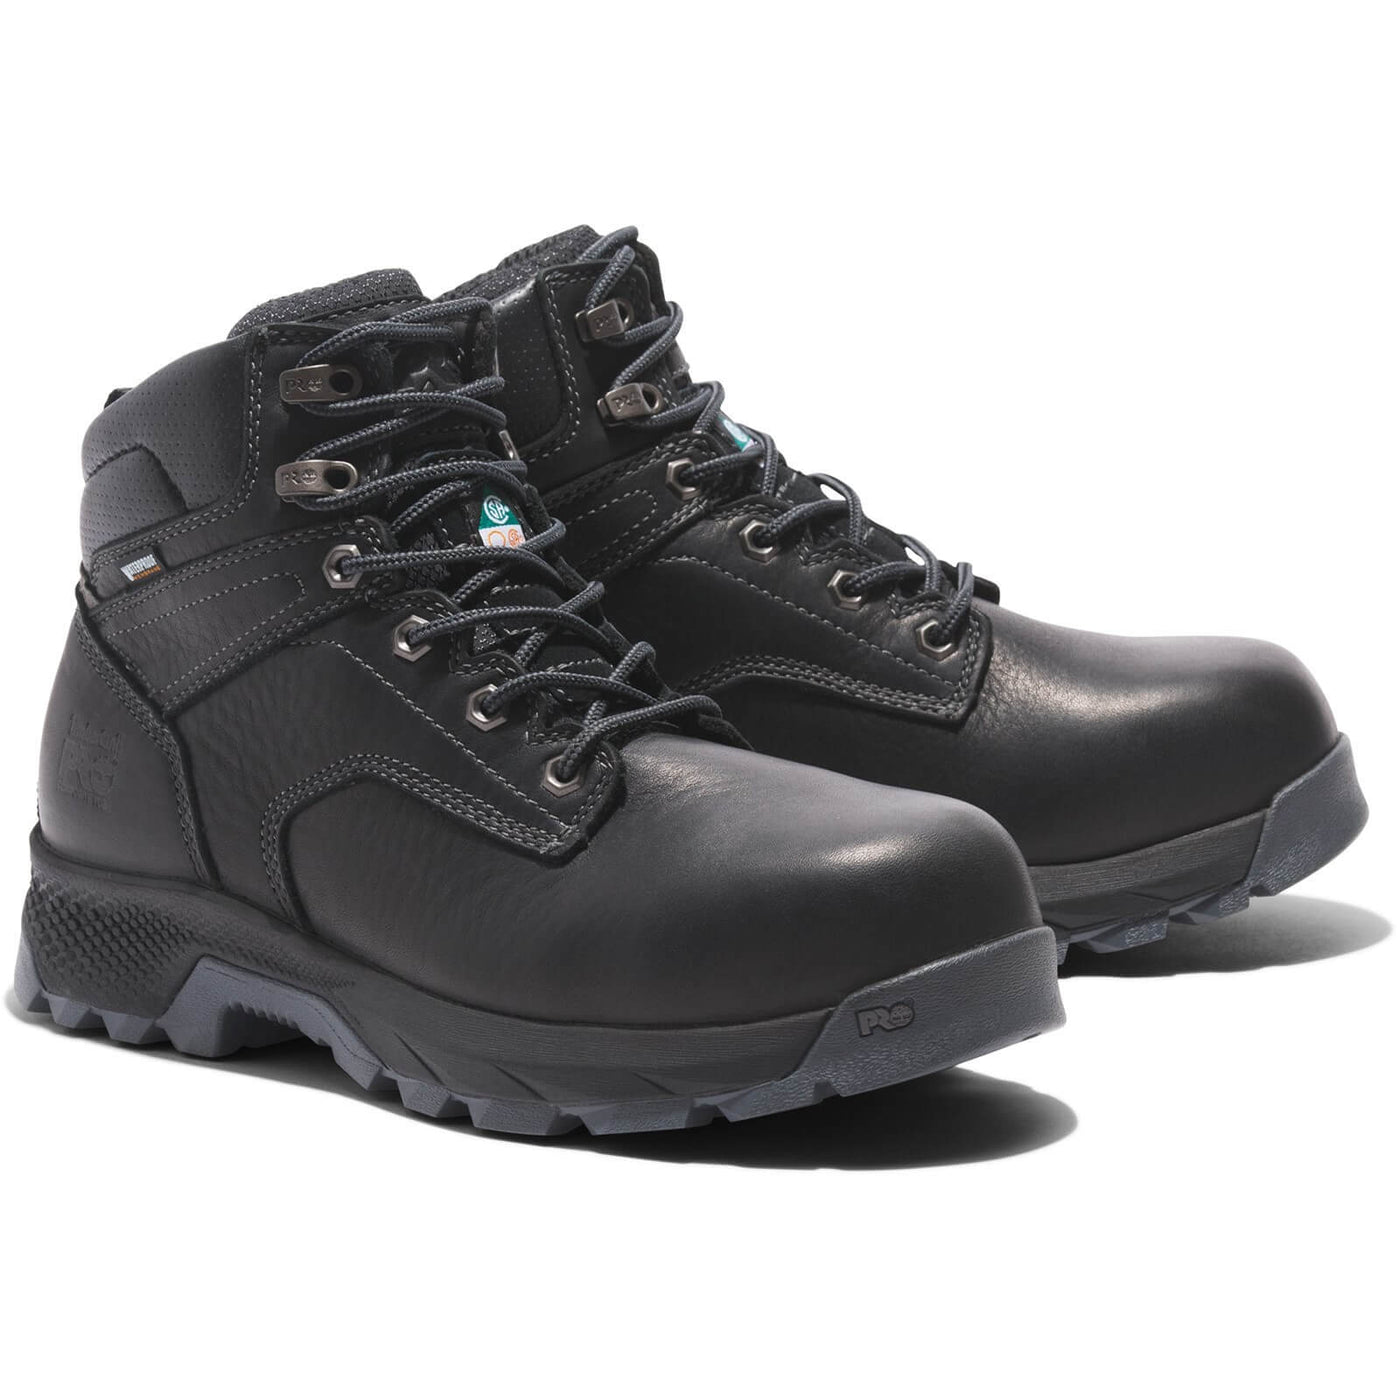 Timberland Pro Titan 6 Inch Lightweight Waterproof S3 Safety Boots Black 3#colour_black